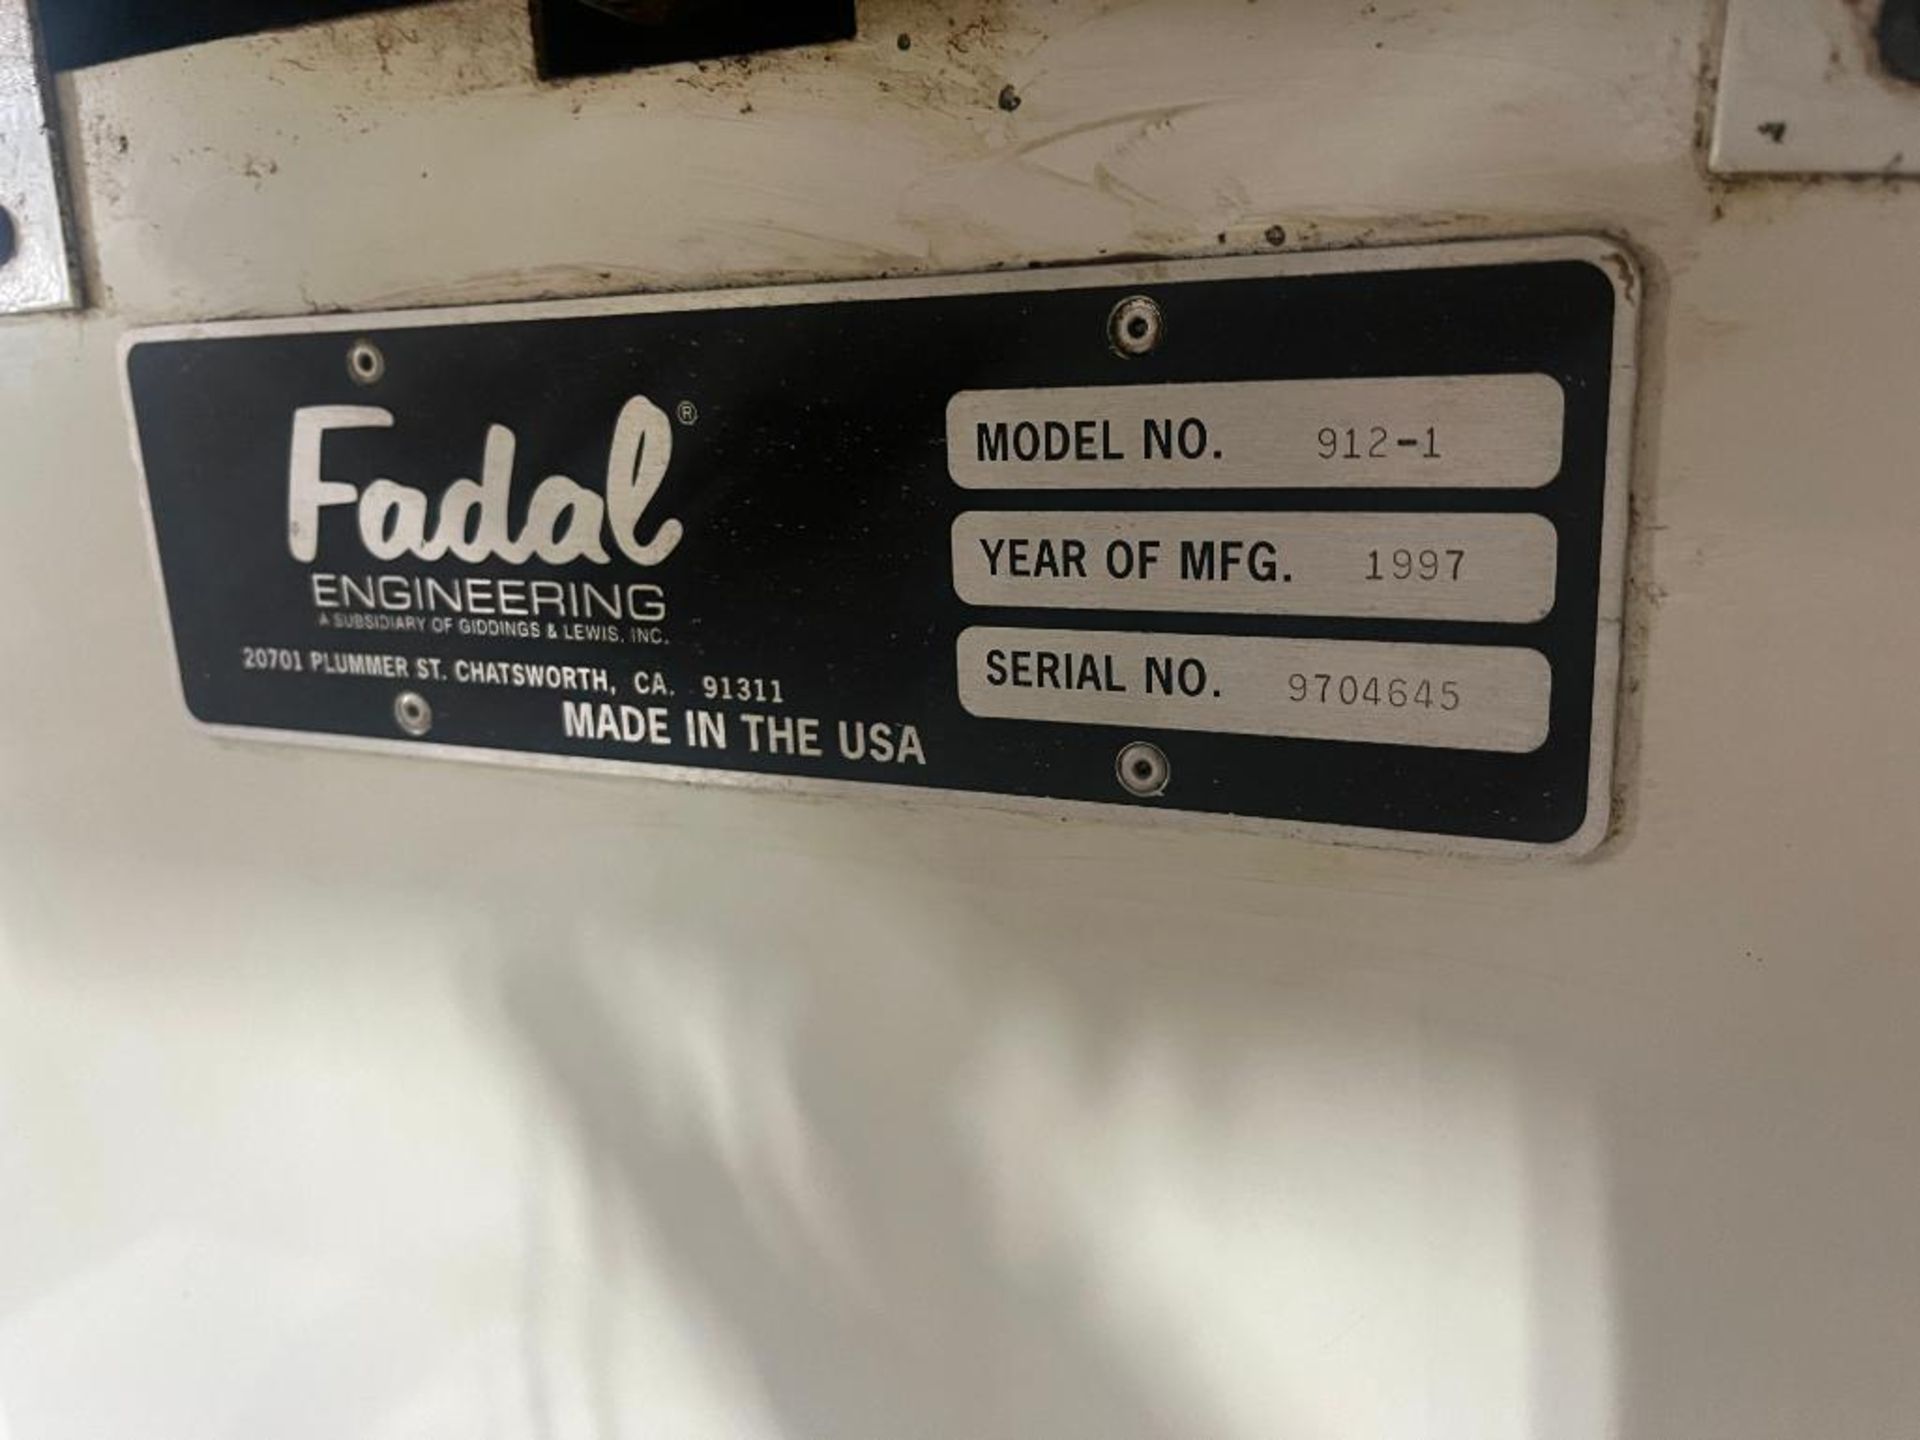 Fadal CNC Vertical Machining Center Model Model 907-1 VMC 6030HT, S/N 9704645 (1997) with Fadal CNC8 - Image 33 of 33